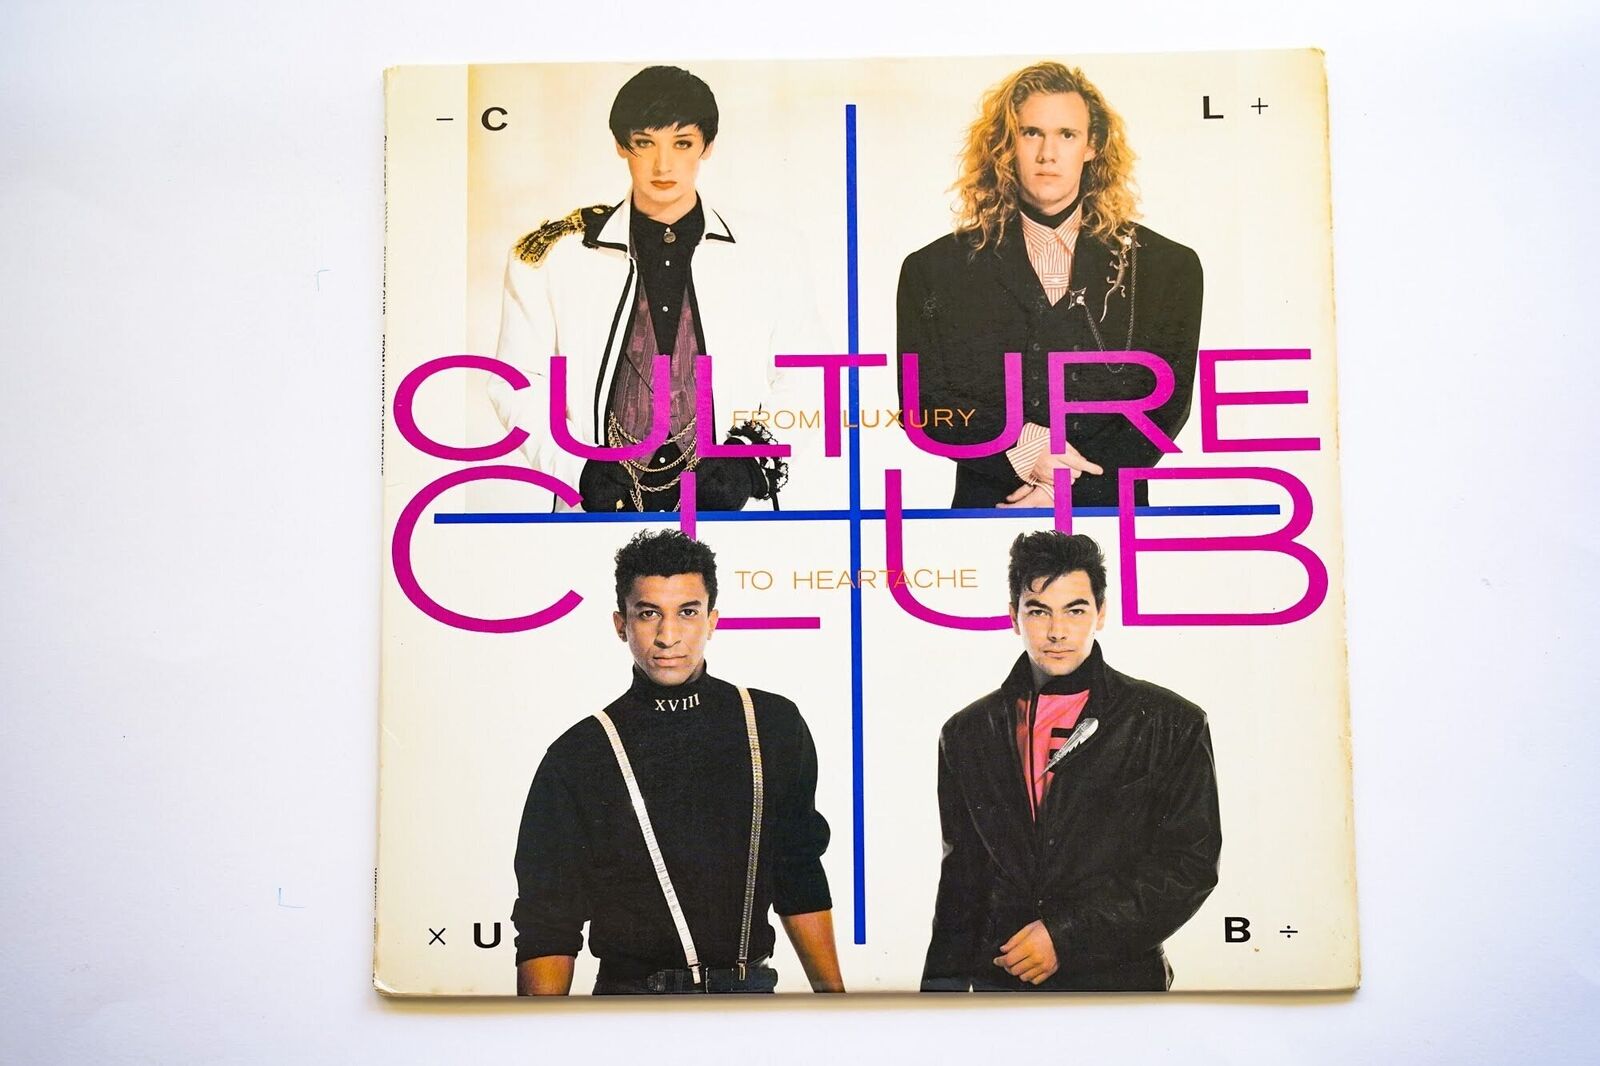 Culture Club - From Luxury To Heartache - Vinyl LP Record - 1986